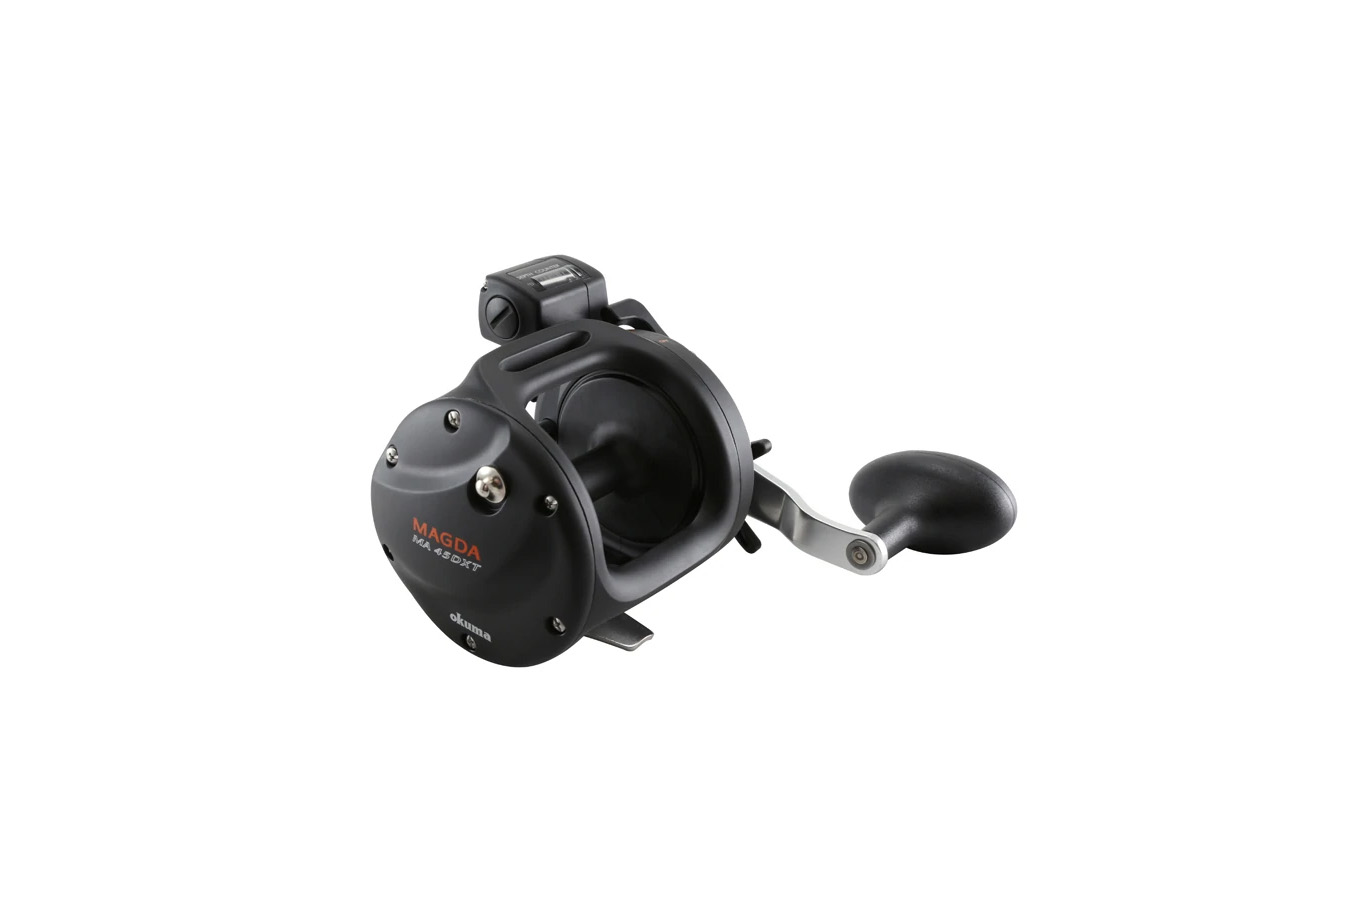 Discount Okuma Magda Pro DXT Linecounter for Sale, Online Fishing Store